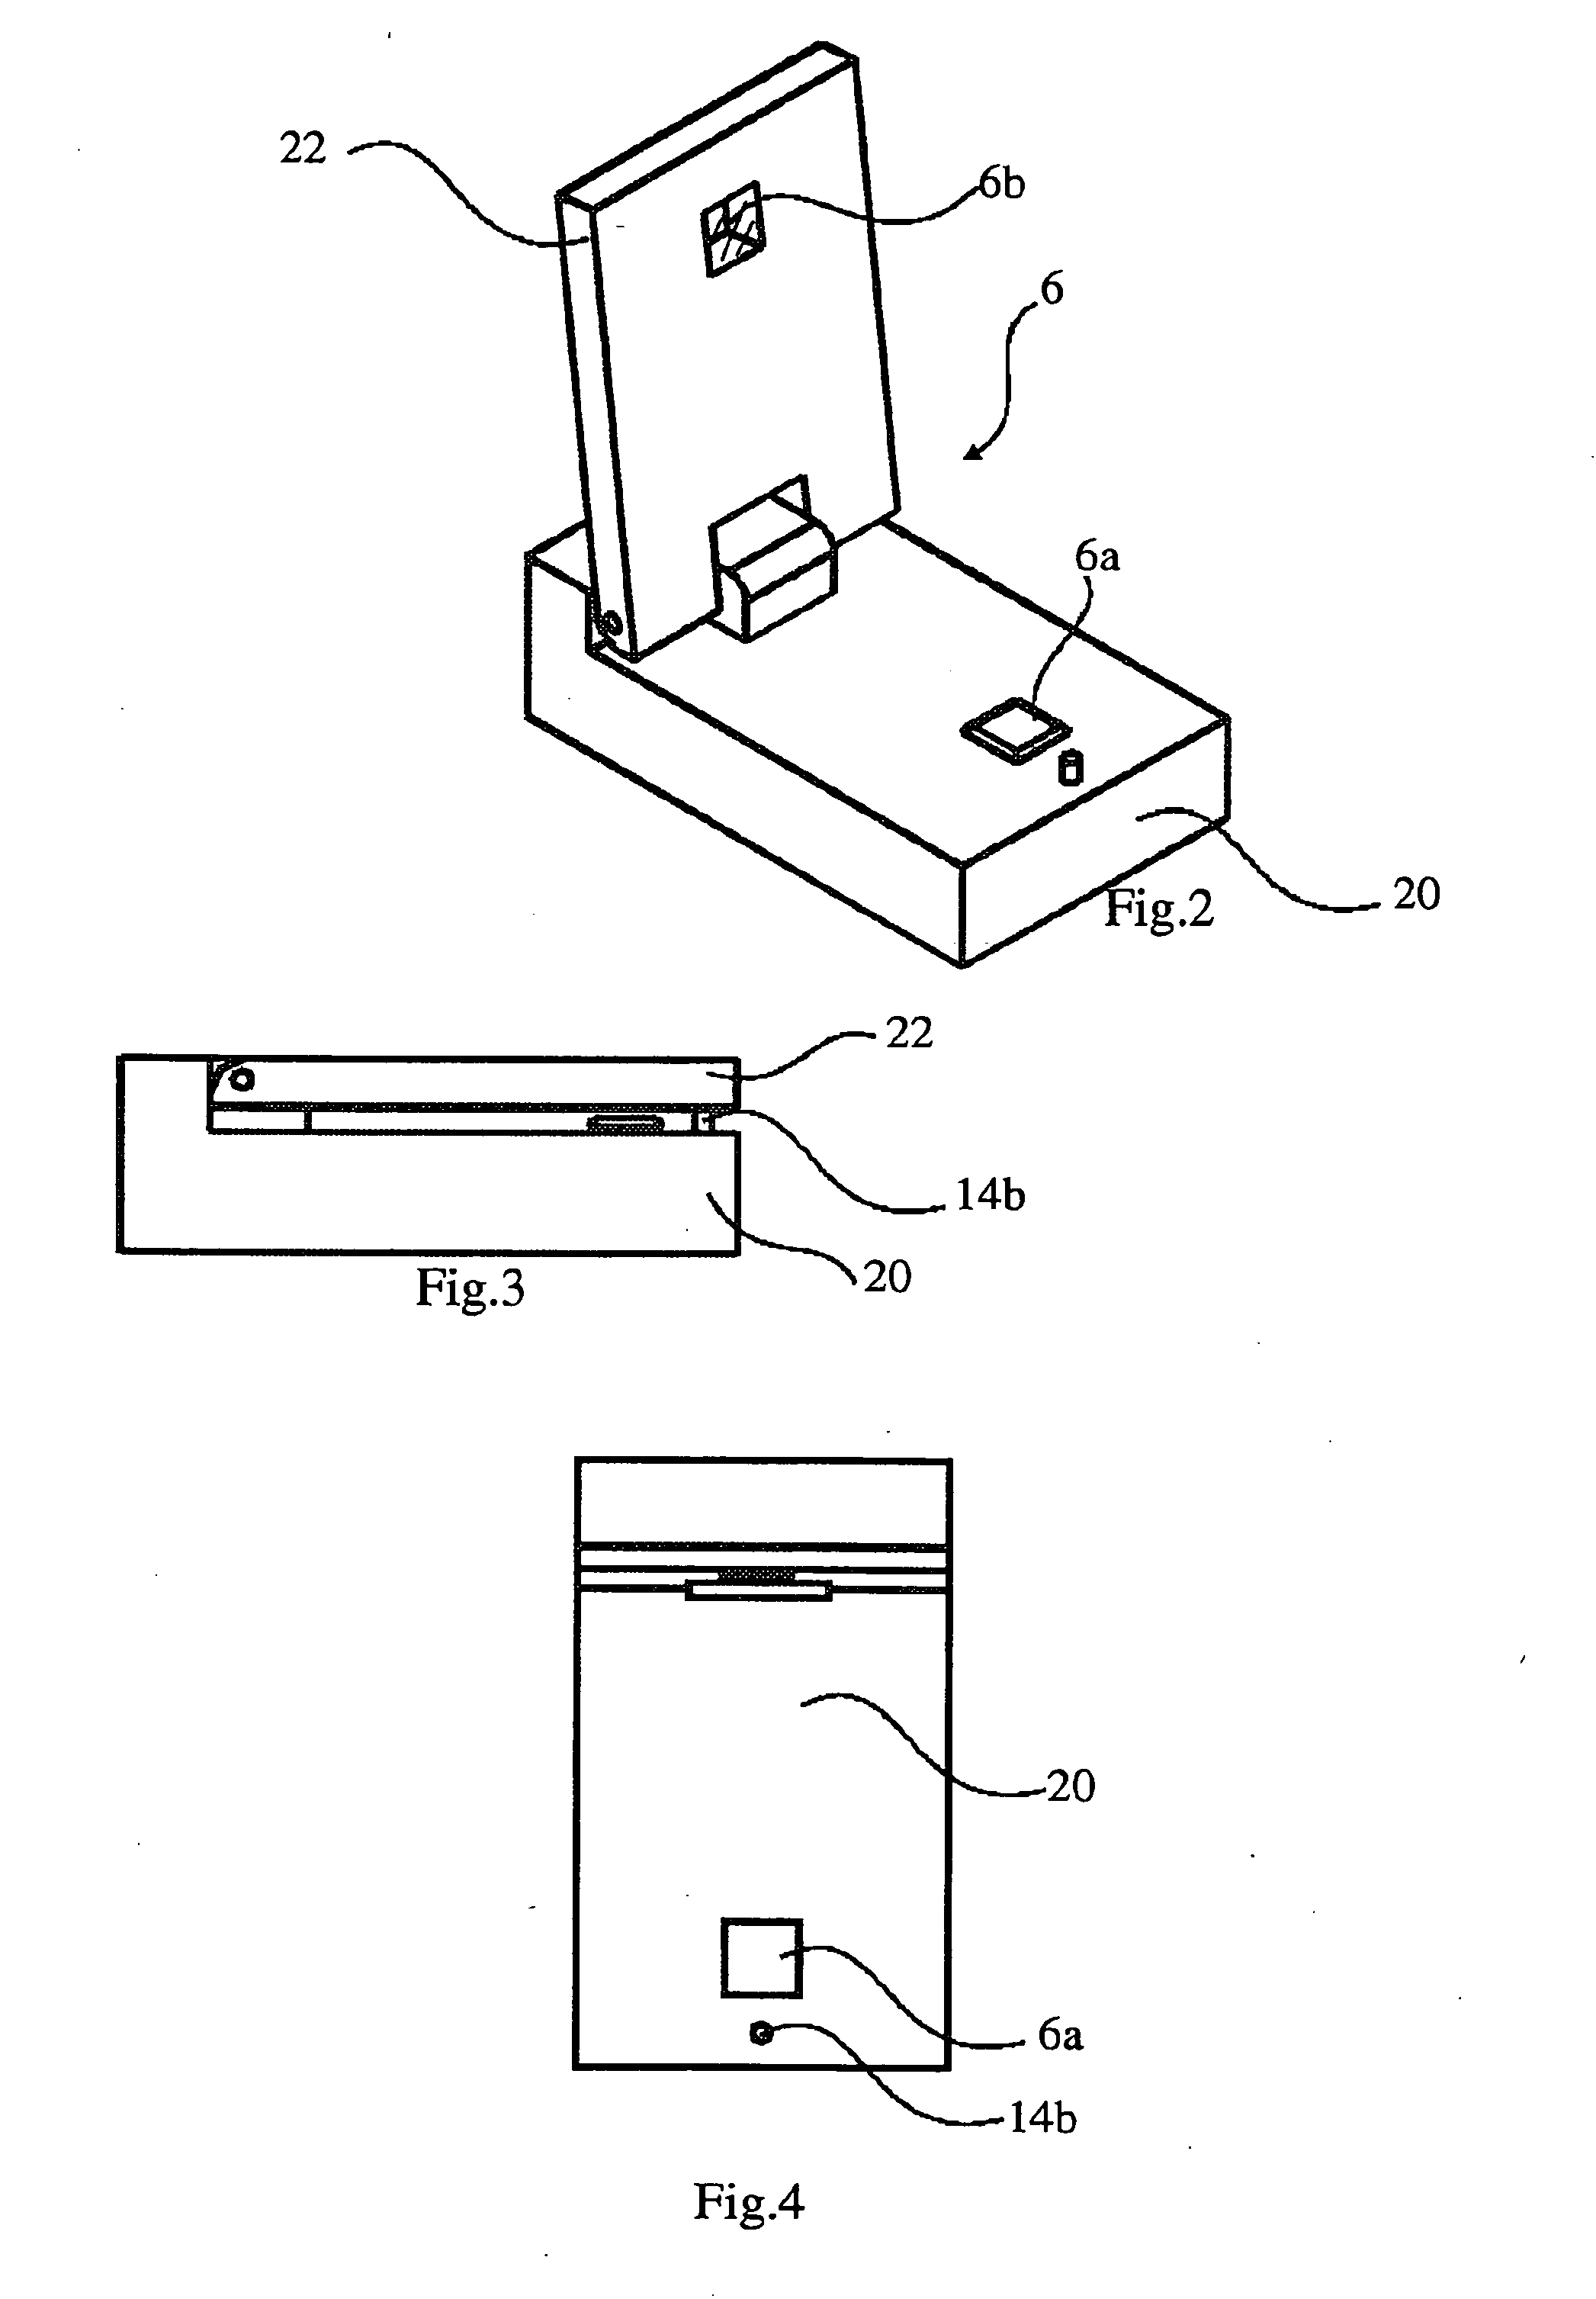 Apparatus and method for spectrophotometric analysis